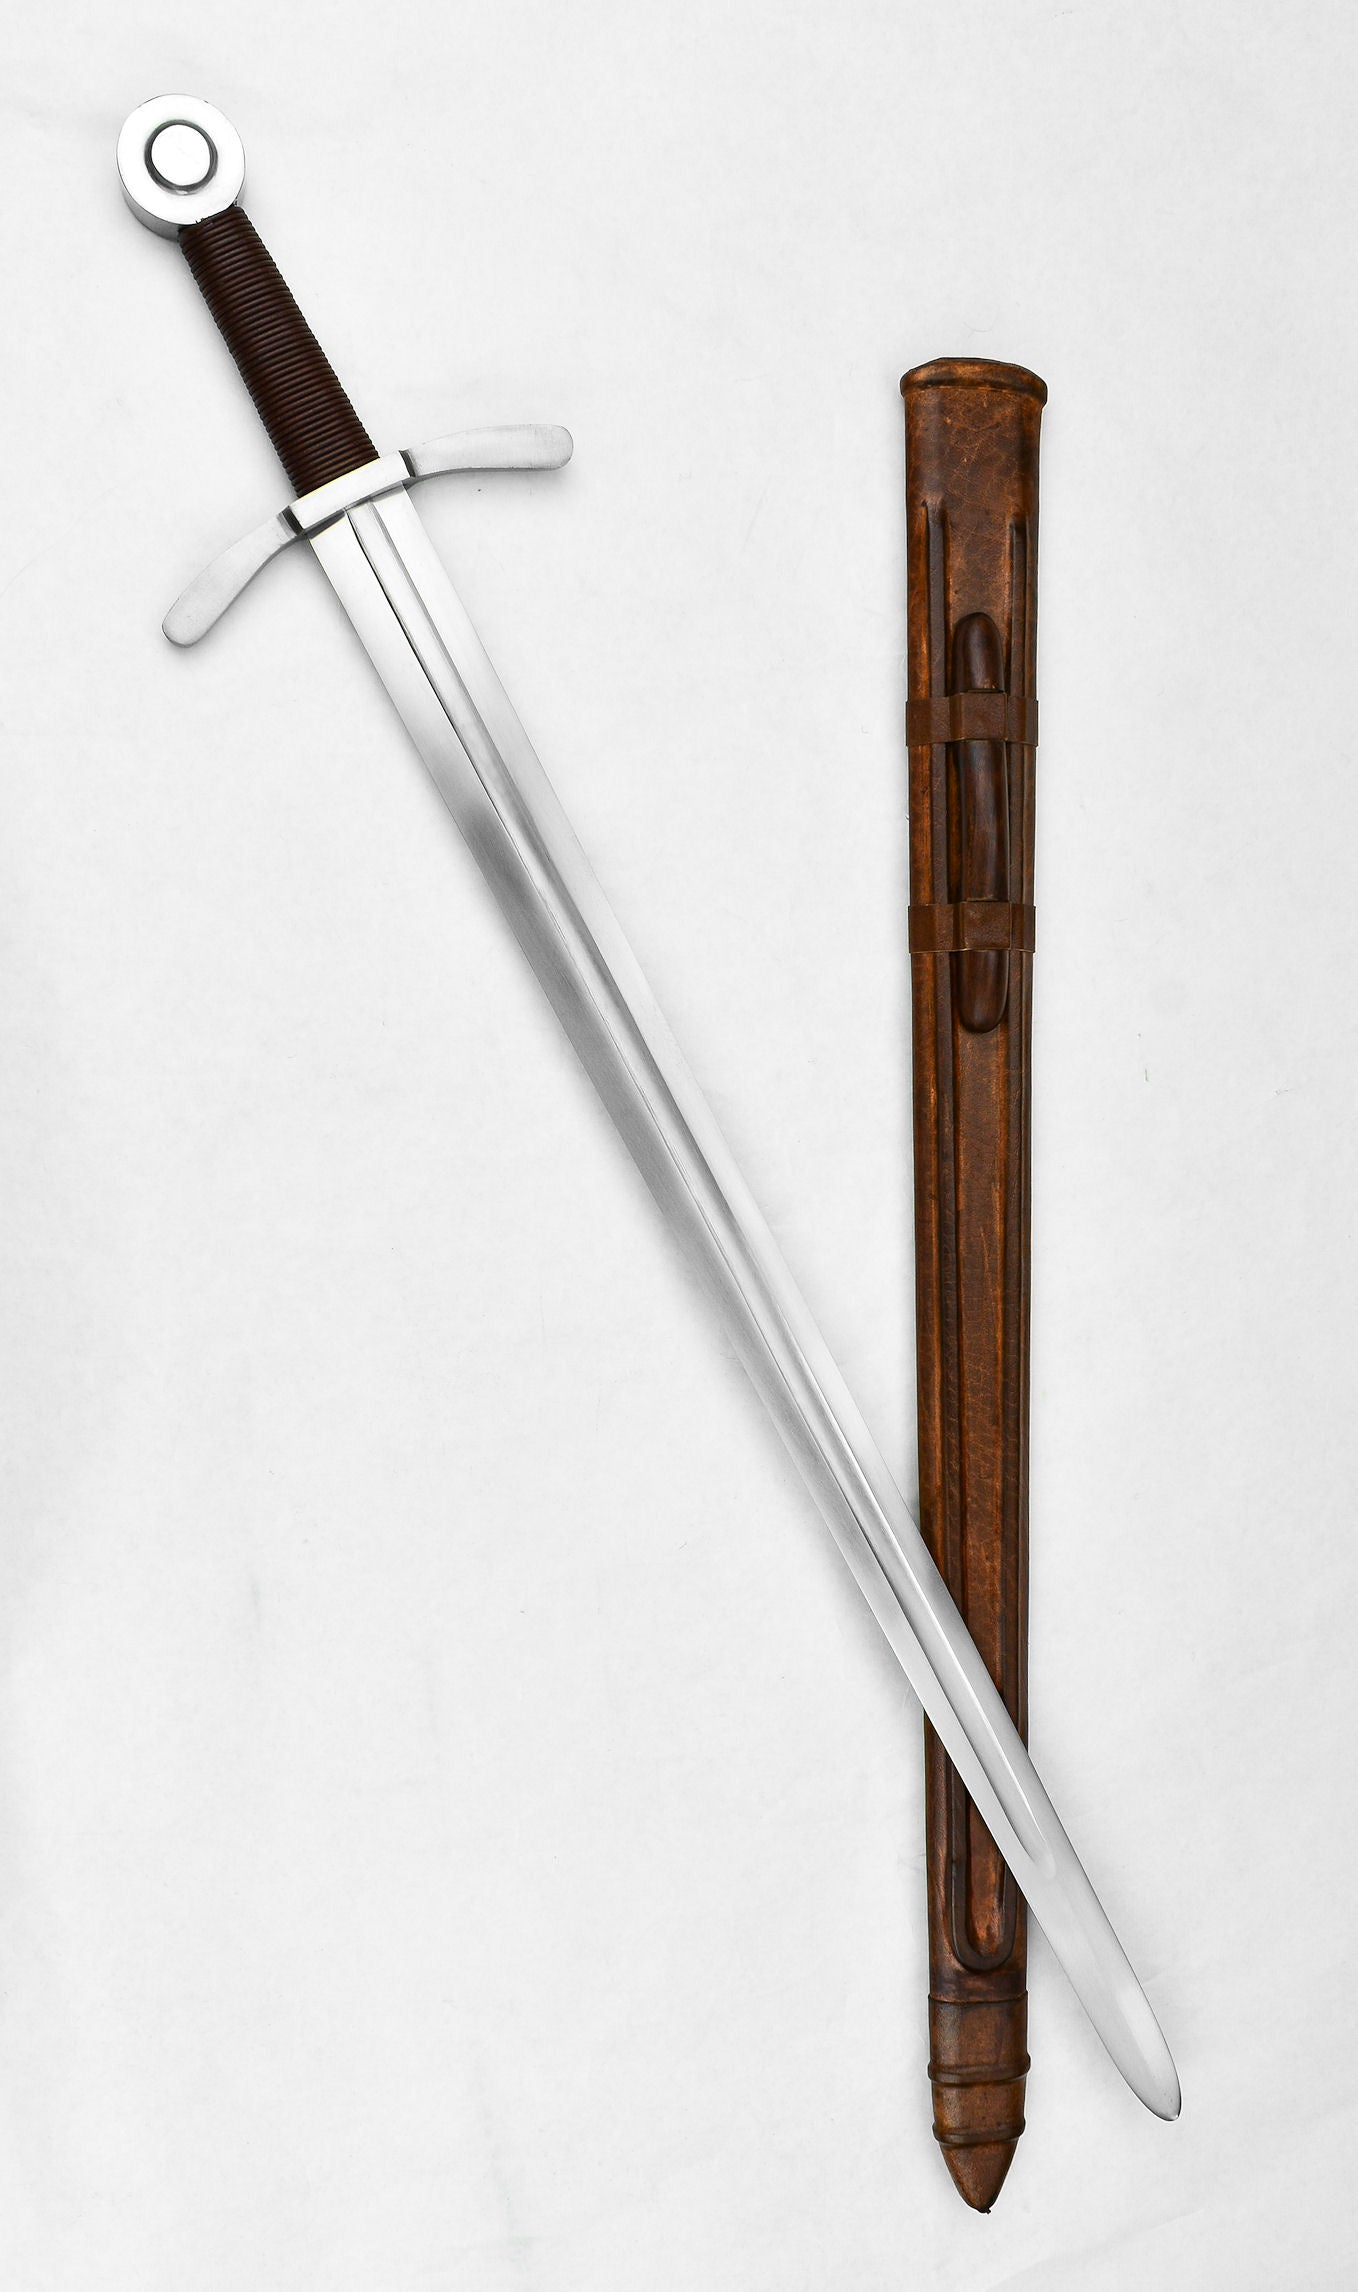 Late Medieval Arming Sword - Stage Combat Version by Deepeeka